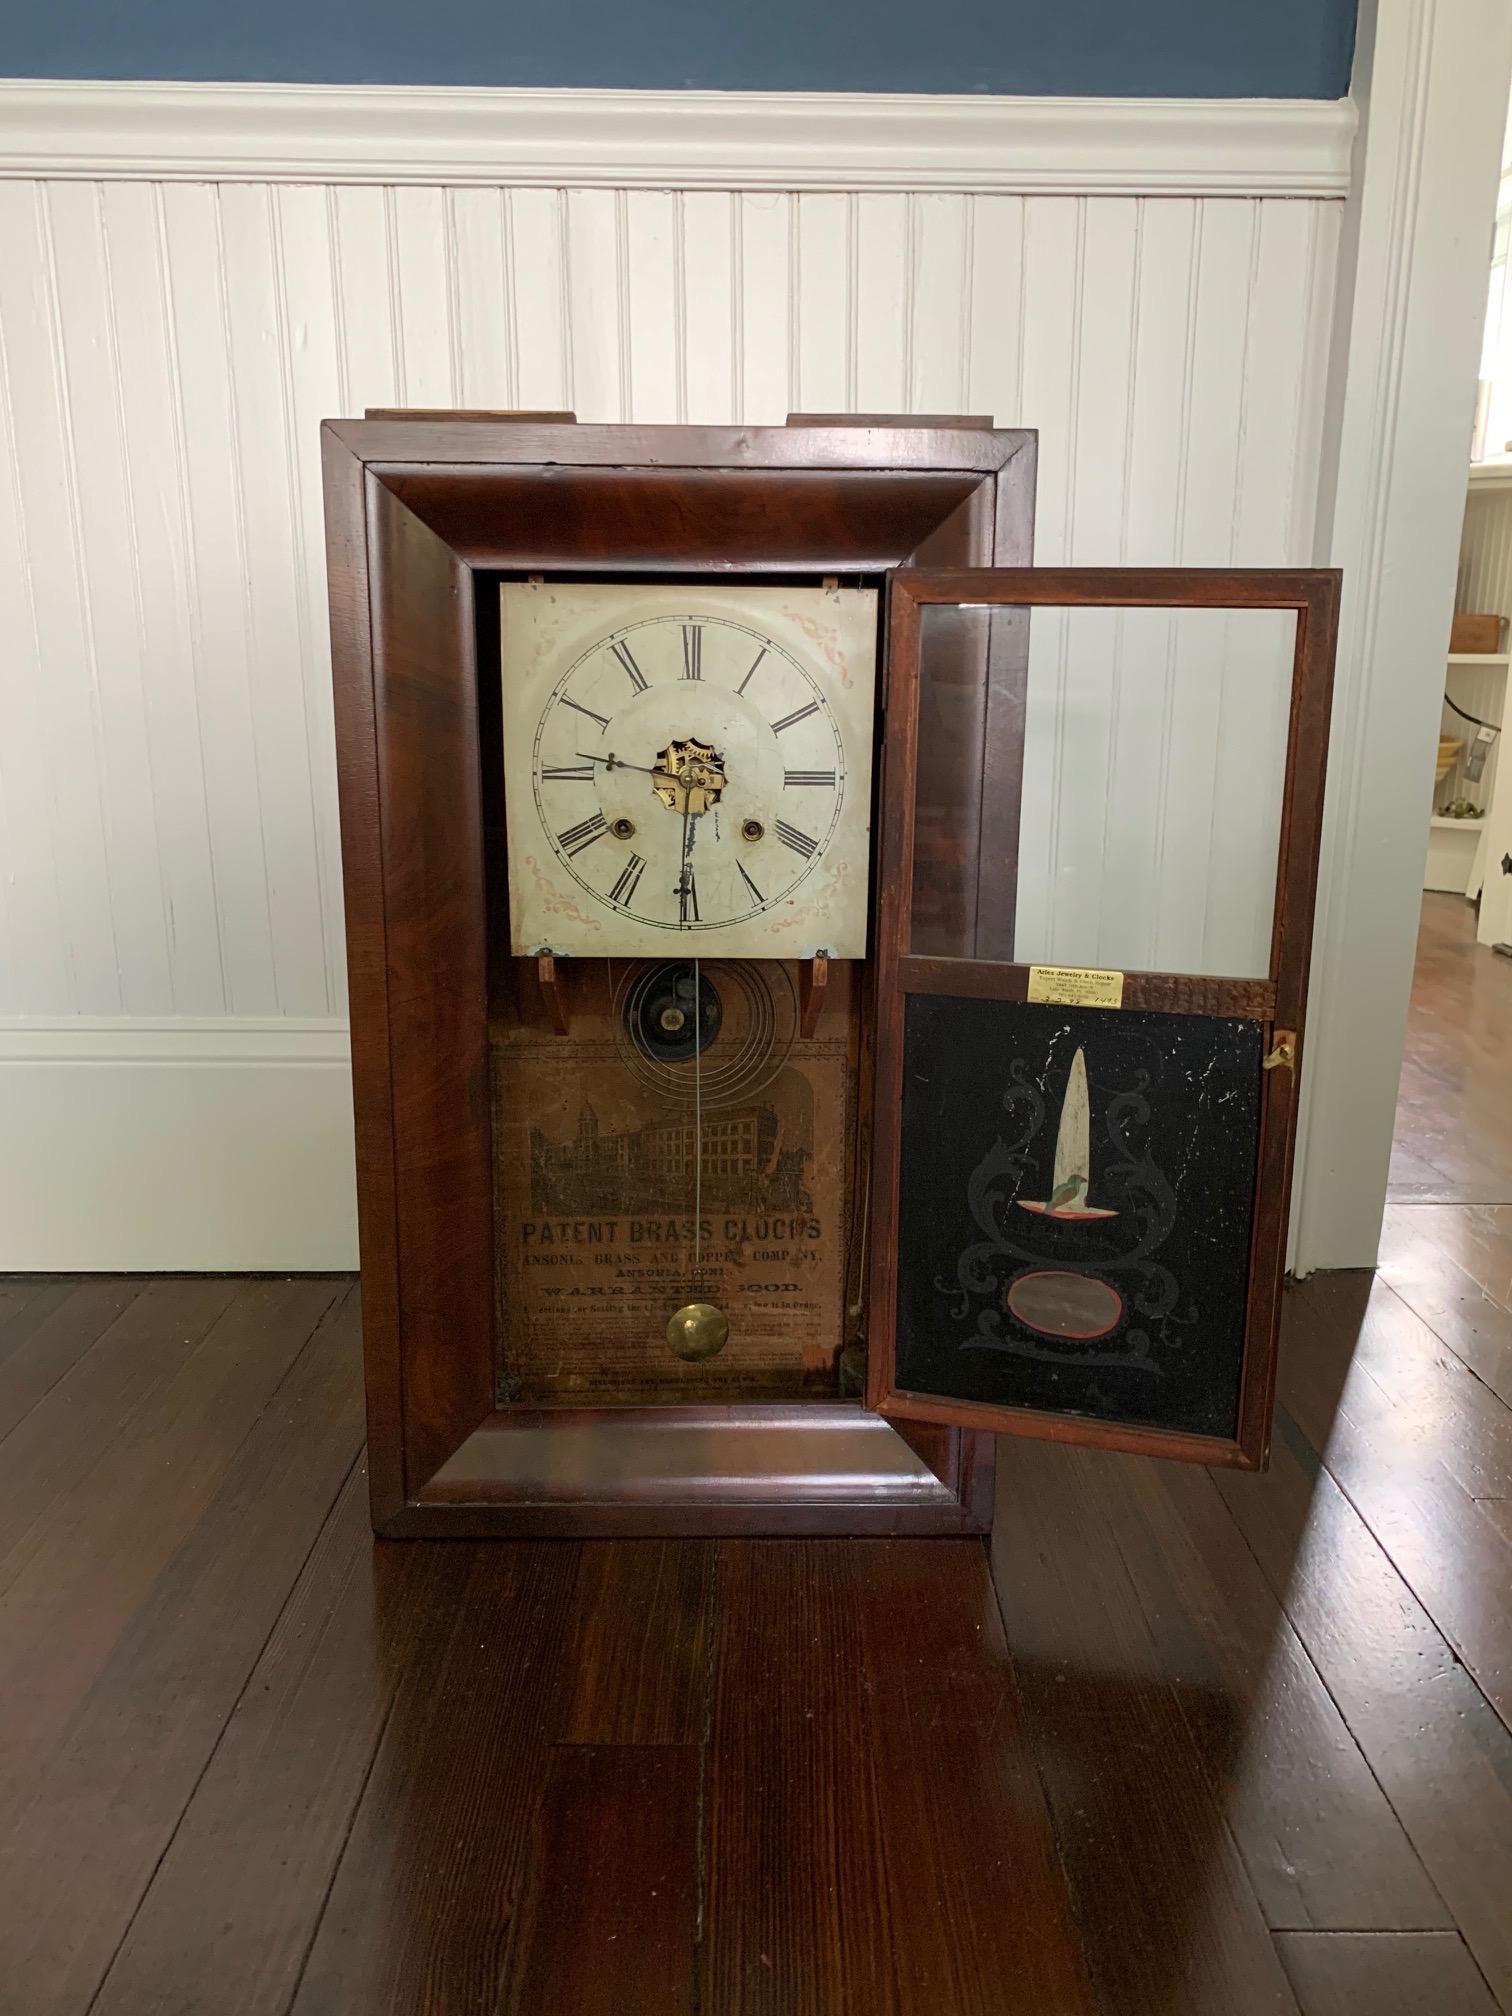 Rosewood shelf clock by Ansonia Clock Company. Brass & copper, 19th century.

Original signed and painted dial.

An Ansonia brass and copper Co, calendar shelf clock, painted tin dial with stamped brass surround, marked Terry's Patent.